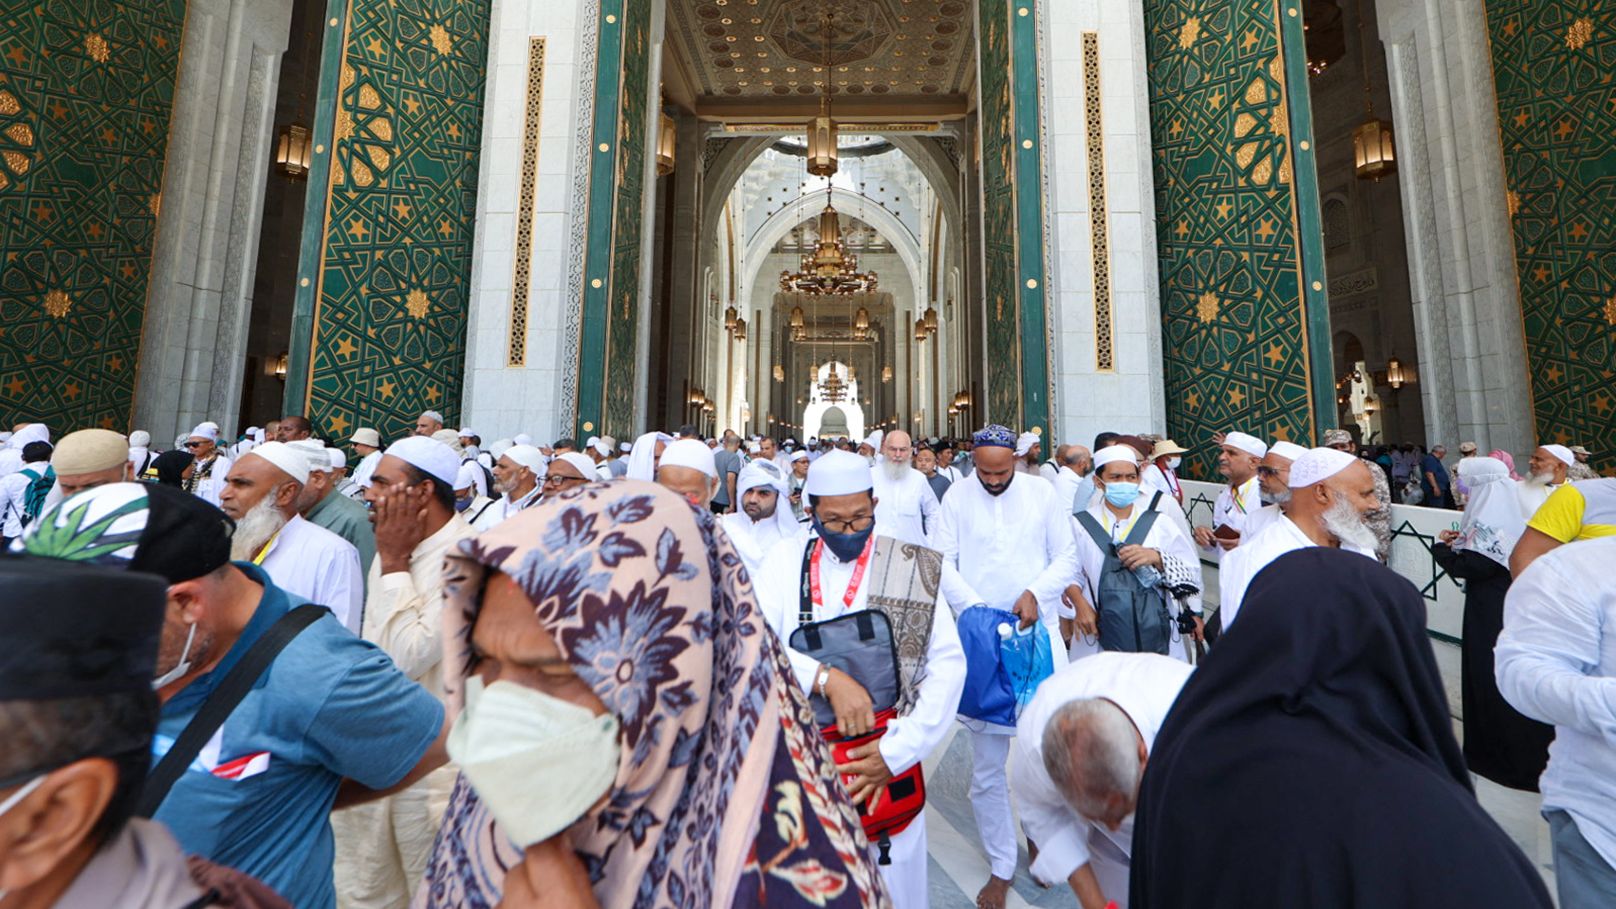 Muslim worshippers gather before the Kaaba at the Grand Mosque in Saudi Arabia's holy city of Mecca on July 1. The kingdom is preparing to welcome 850,000 Muslims from abroad for the annual Hajj after two years during which pilgrims not already in Saudi Arabia were barred because of Covid-19 pandemic restrictions. 